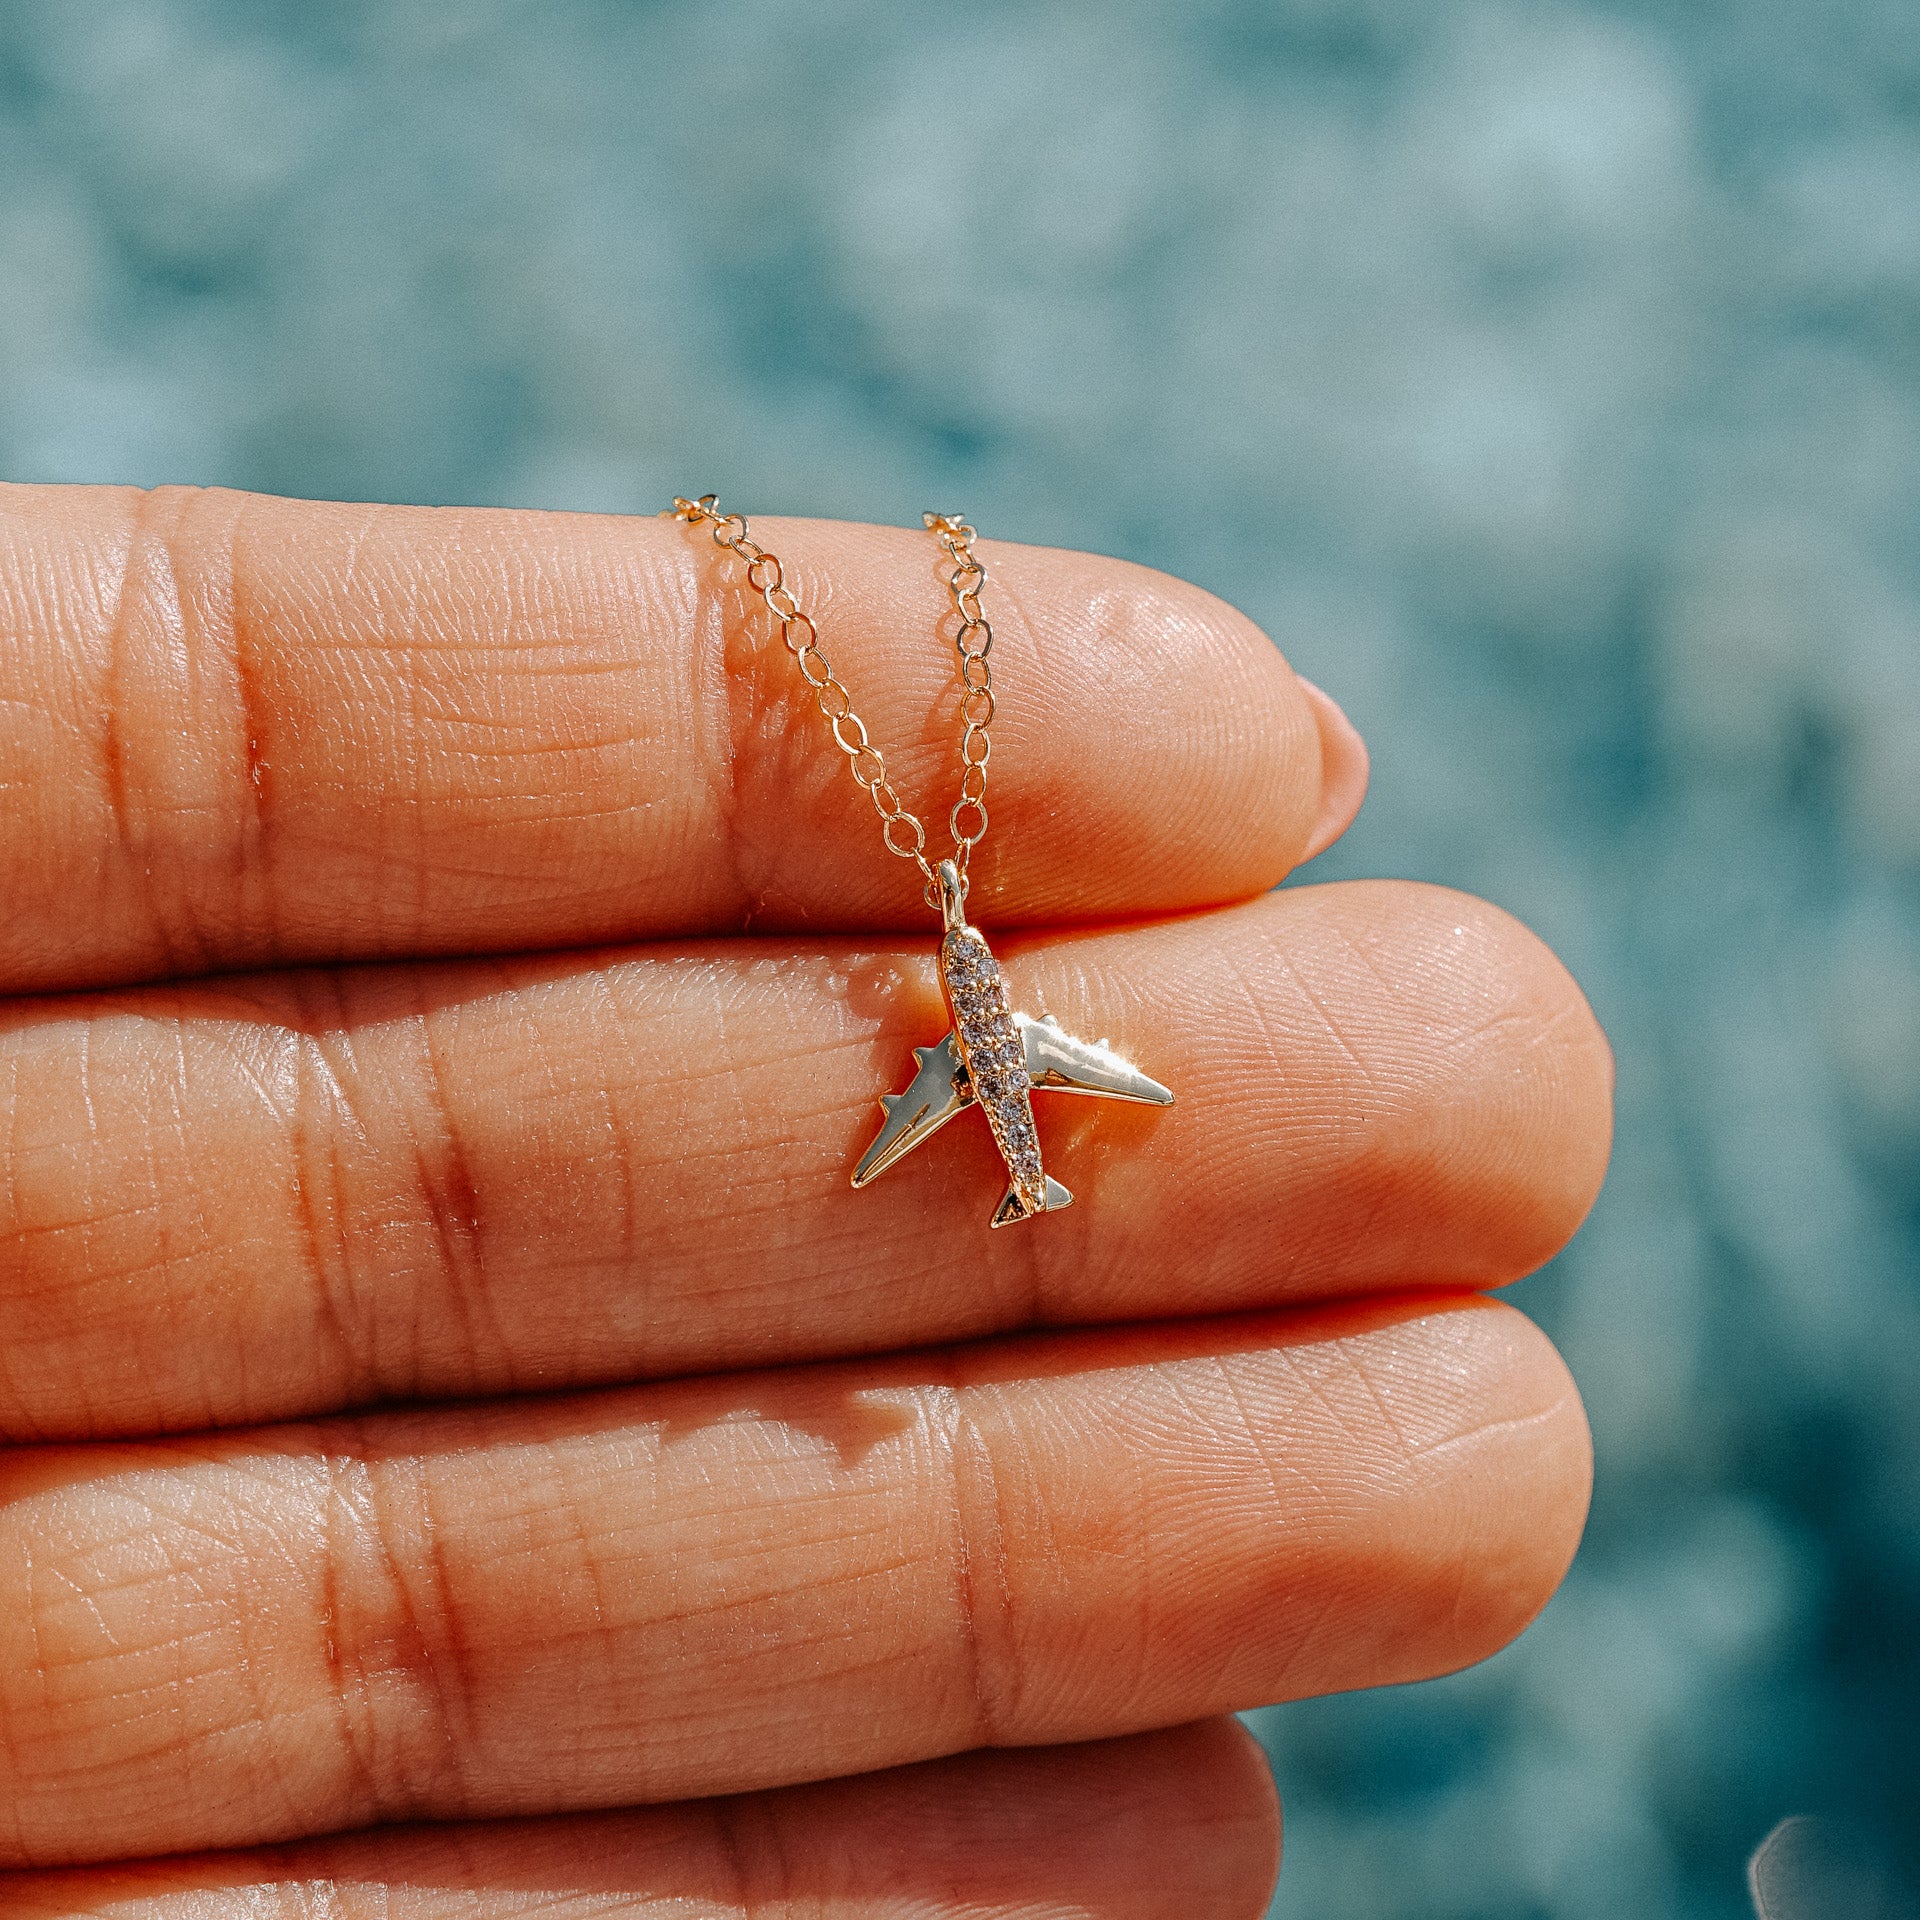 Gold Silver Plane Necklace Airplane Pendant Necklaces Charms Aircraft Chain  Necklaces For Women Girls Tiny Dainty Jewelry | Wish